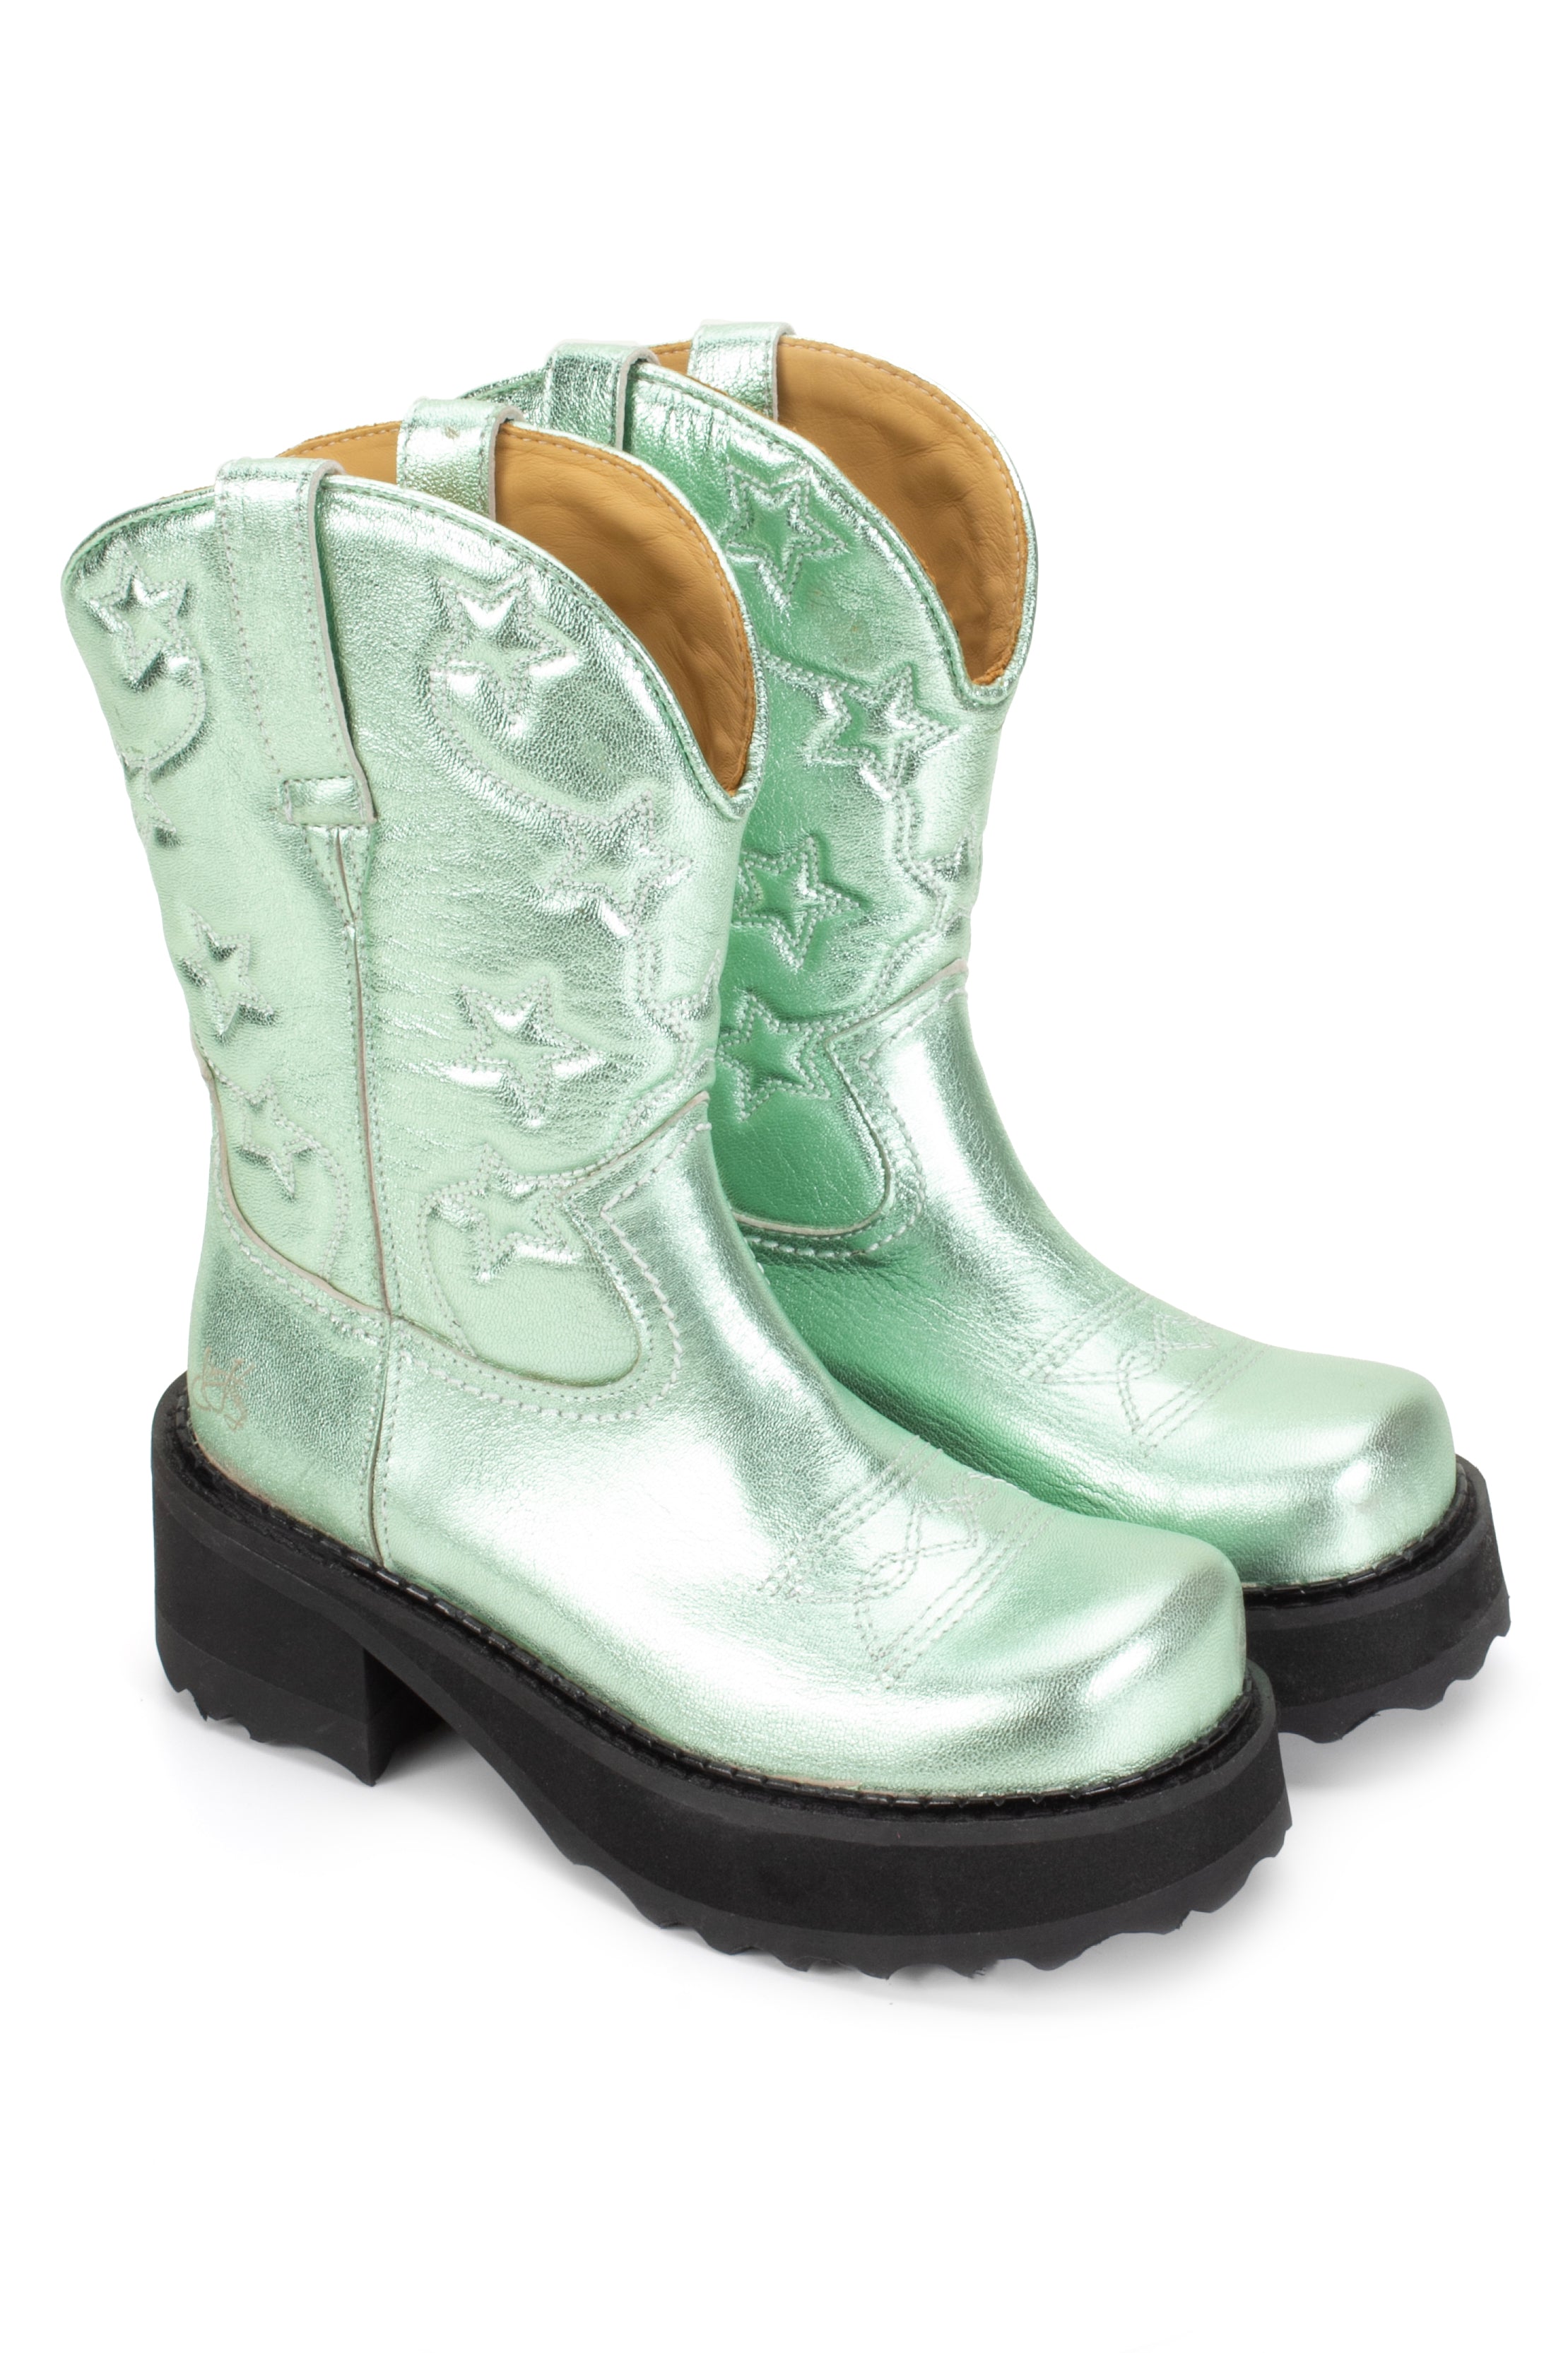 The Anna Sui x John Fluevog Ankle Cowboy Boot, are a pair of peppermint-colored cowboy-style boots with a high black sole